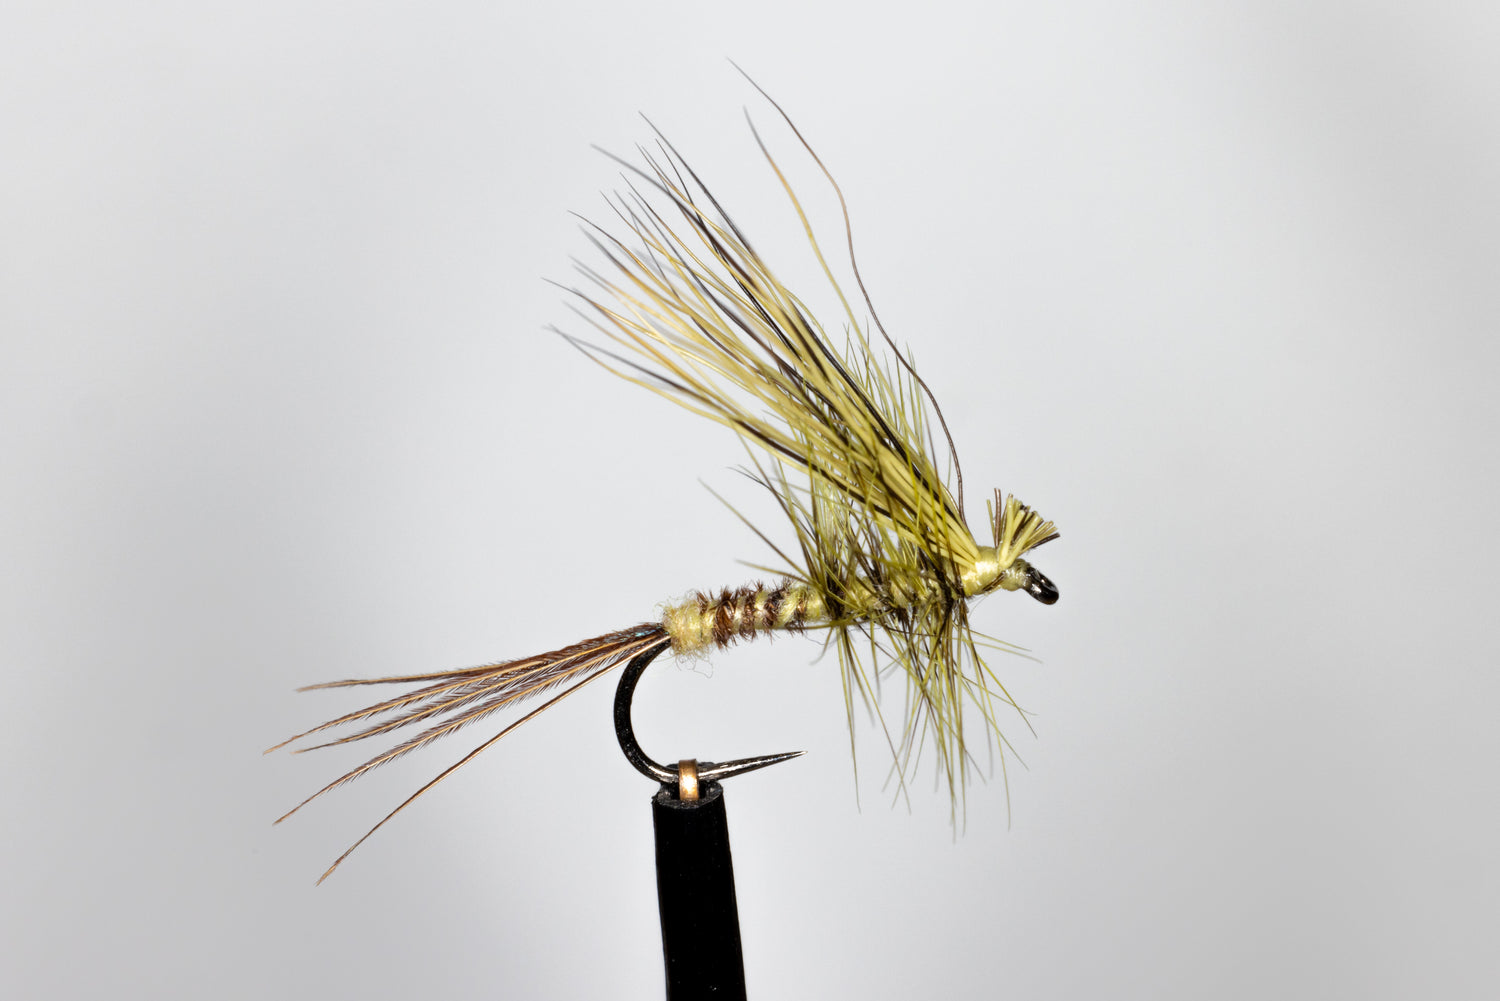 Locally Tied Fly Patterns